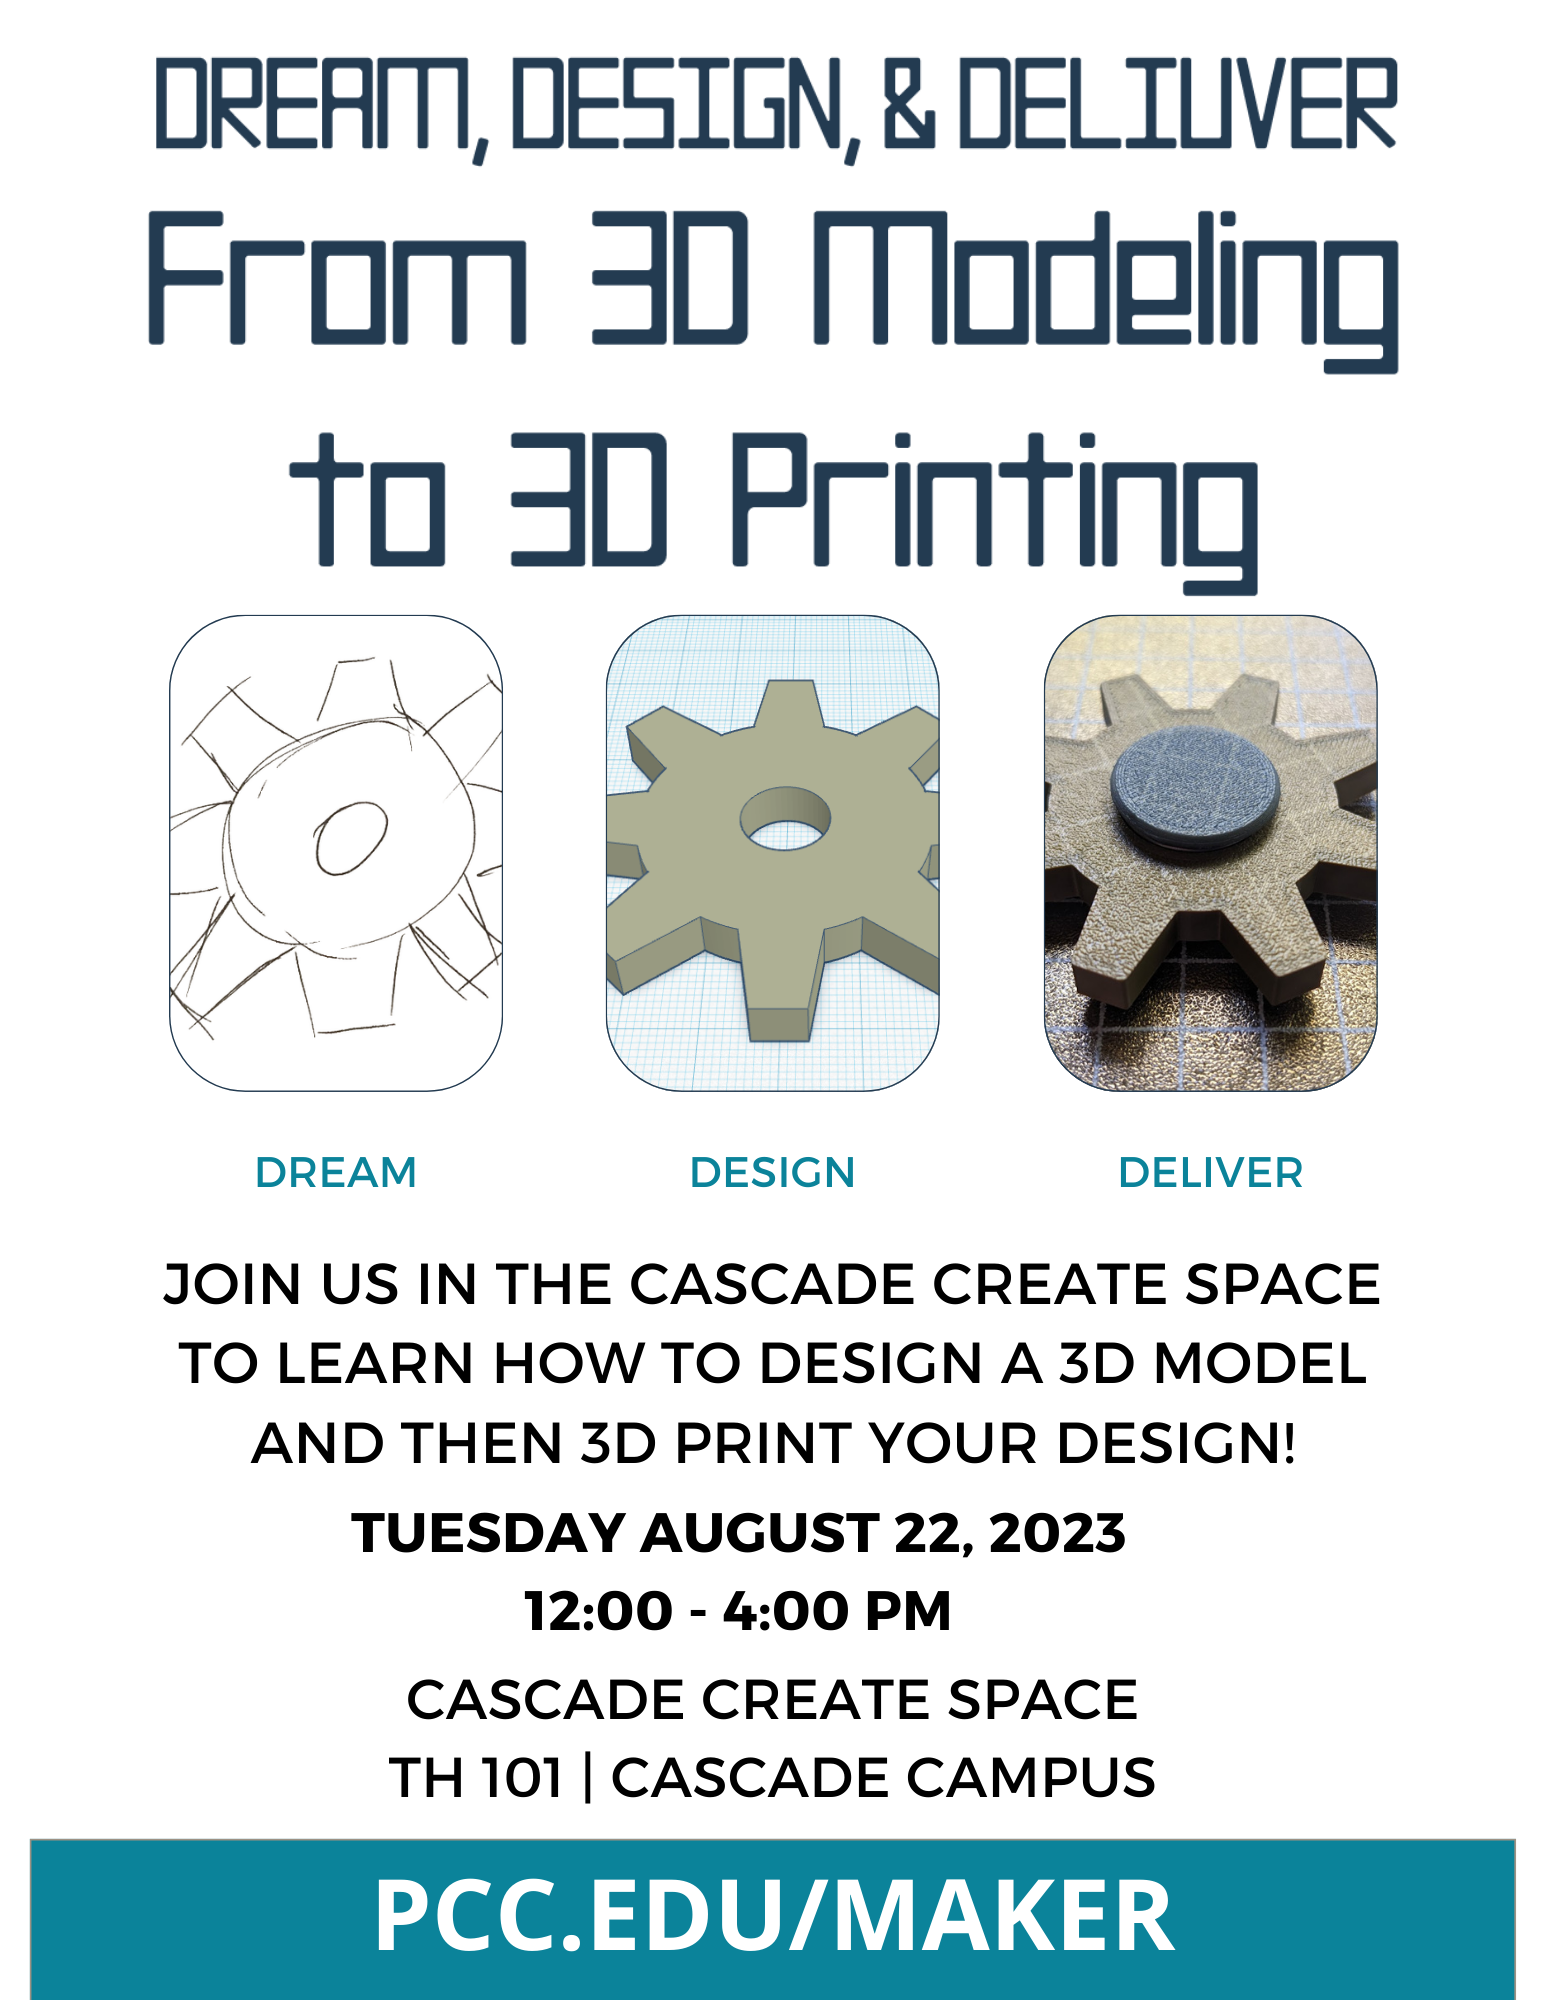 Dream, Design, and Deliver: From 3D Modeling to 3D Printing
Join us in the CASCADE CREATE SPACE to Learn how to design a 3D model and then 3d print your design!

Tuesday August 22, 2023
12:00 - 4:00 PM

Cascade CREATE Space
TH 101 | CASCADE CAMPUS

PCC.EDU/MAKER